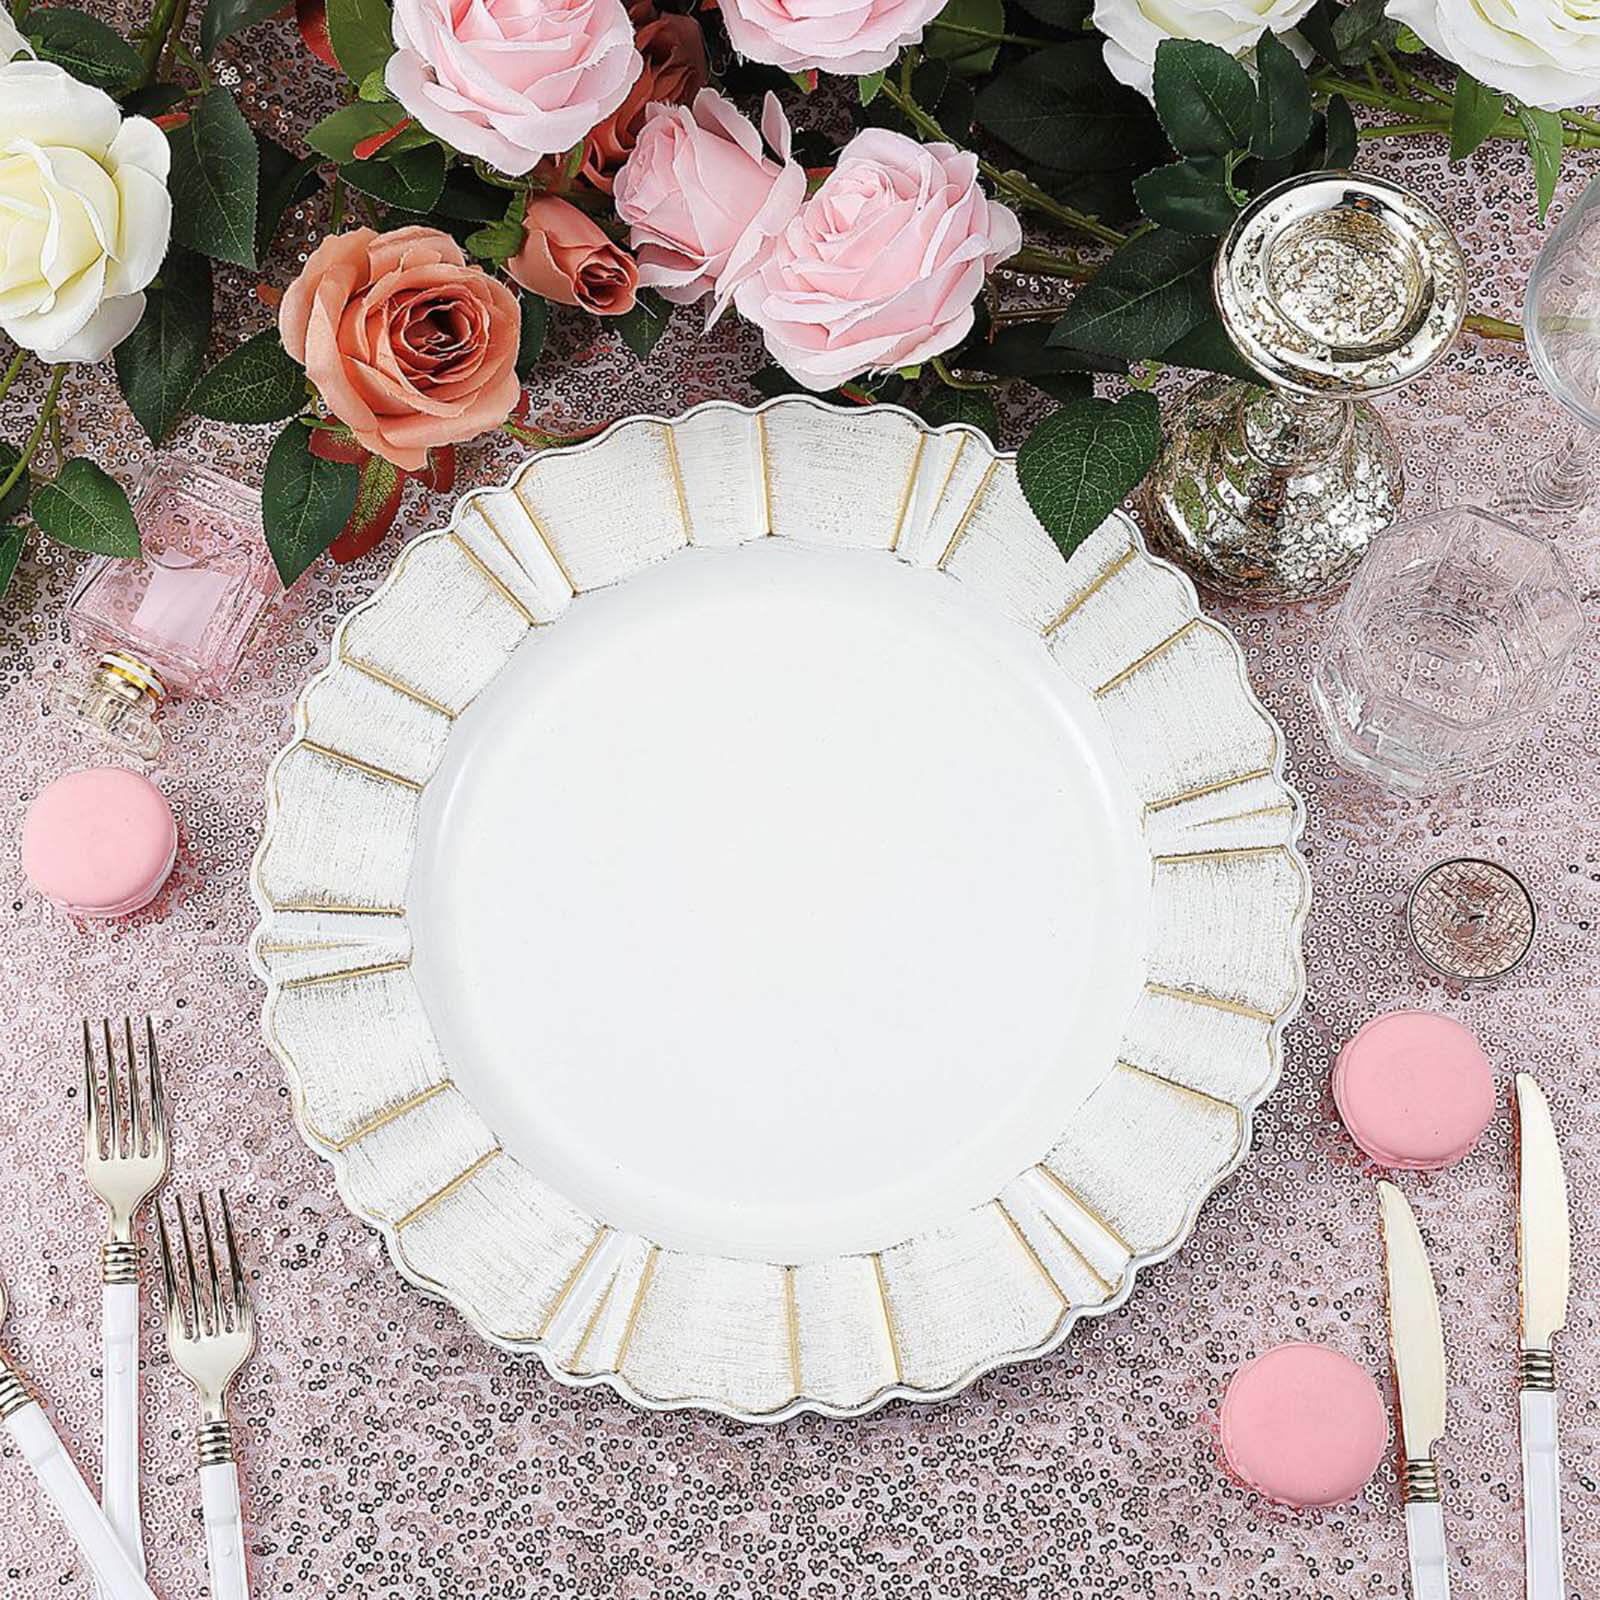 Efavormart Set of 6 - 13" Round - White Plastic Charger Plates With Waved Scalloped Rim for Weddi... | Walmart (US)